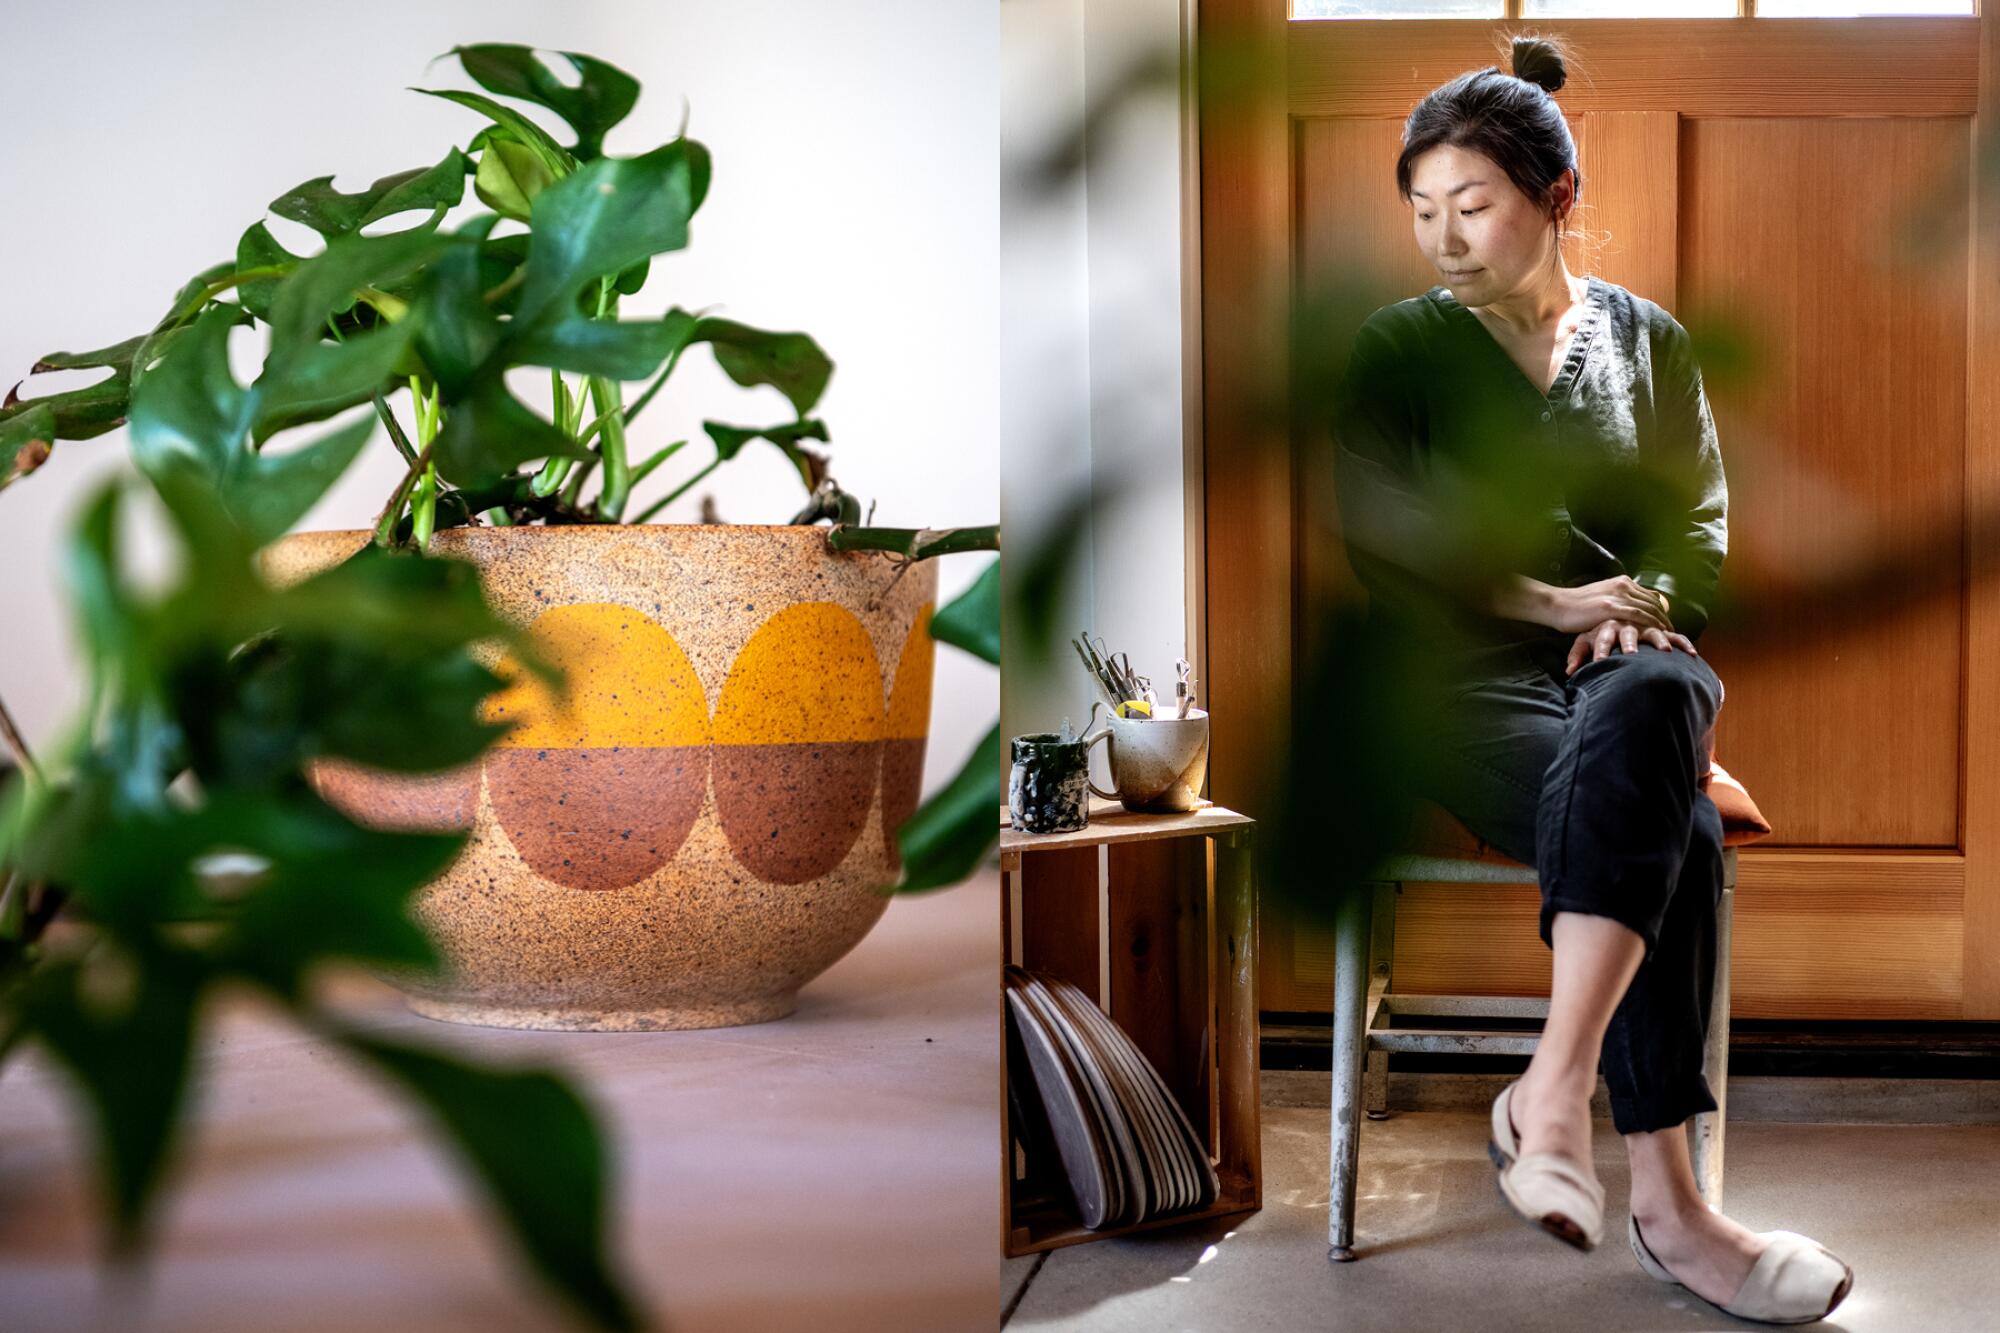 A potted plant on the left and a full-body shot of a woman seated on the right.